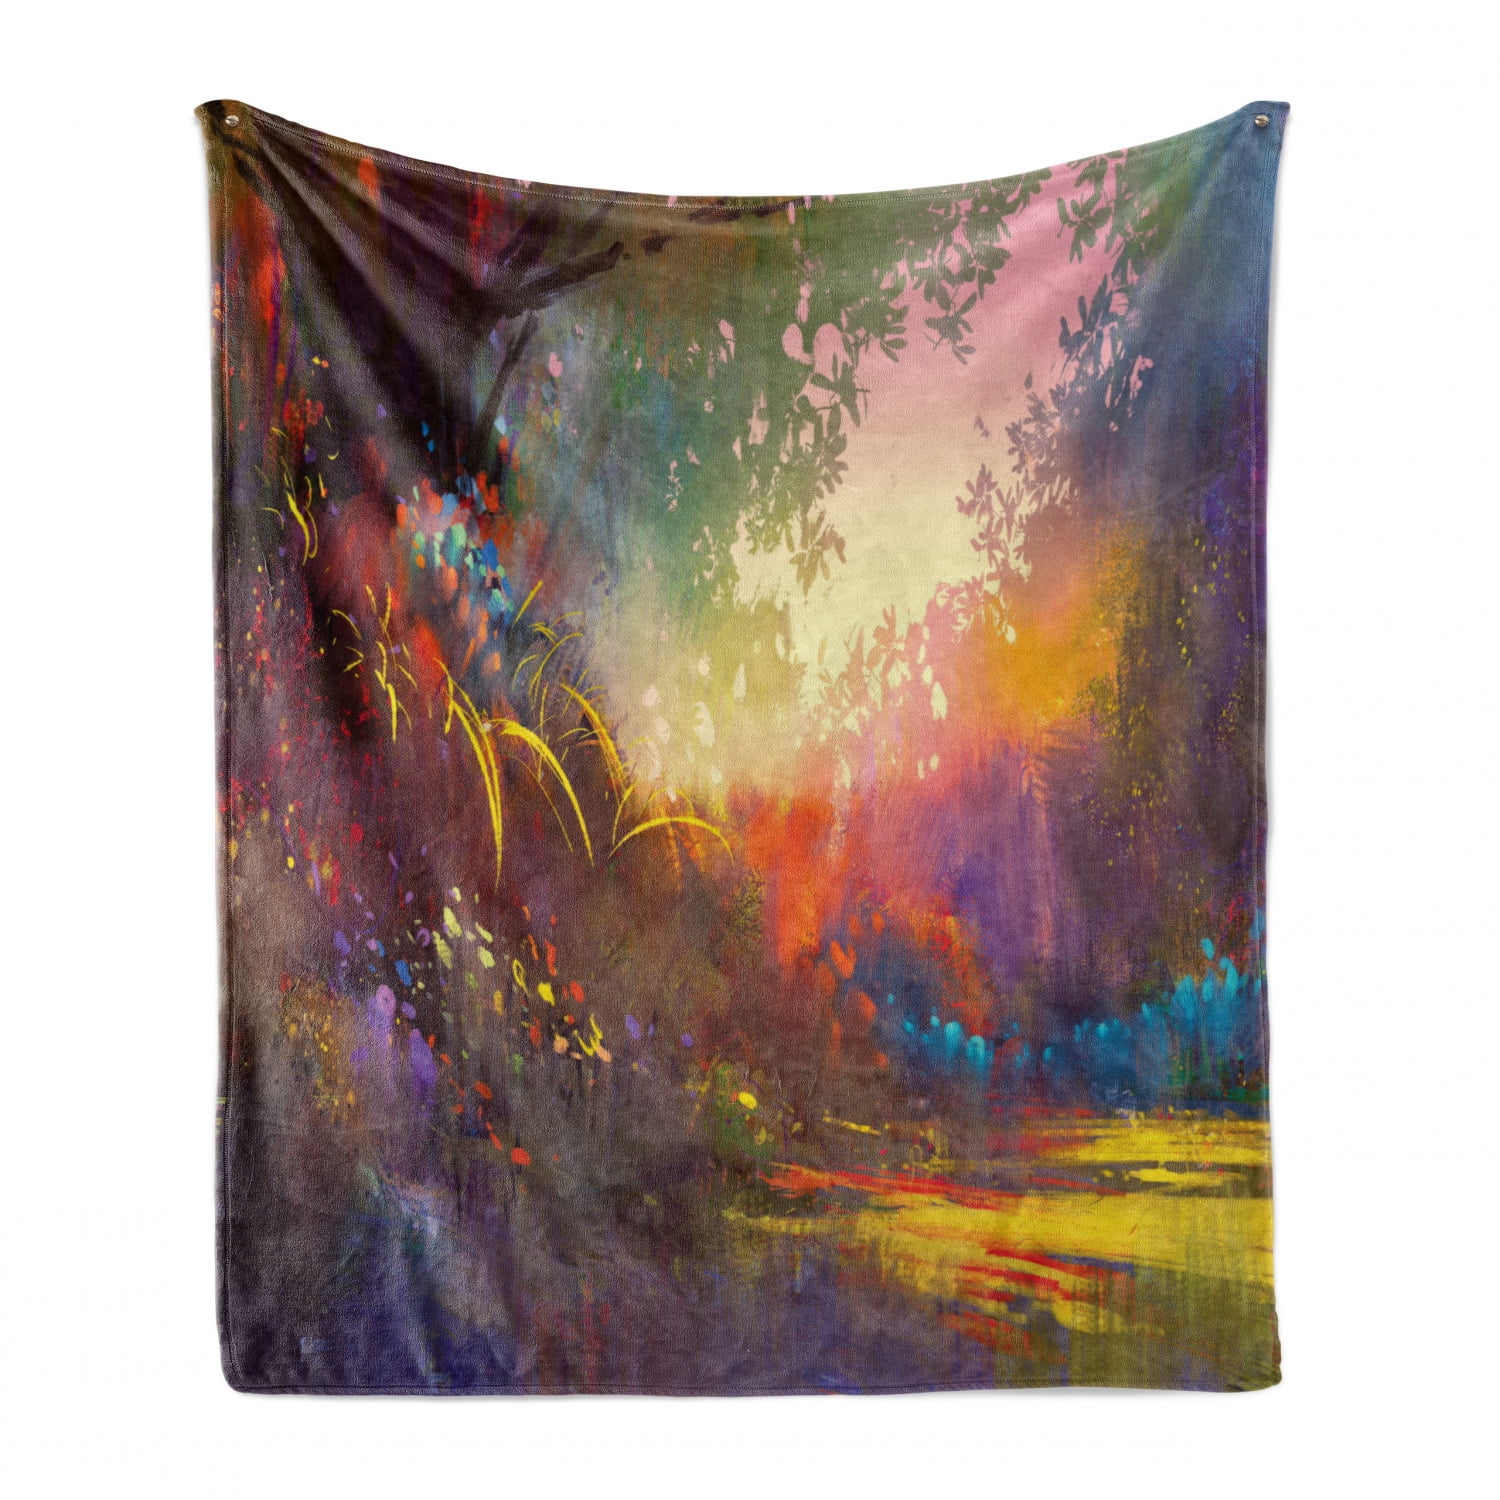 60 x 80 Ambesonne Fantasy Soft Flannel Fleece Throw Blanket Cozy Plush for Indoor and Outdoor Use Lake with Brush Effects Surreal Nature Elf Tranquil and Serene Art Print Multicolor 